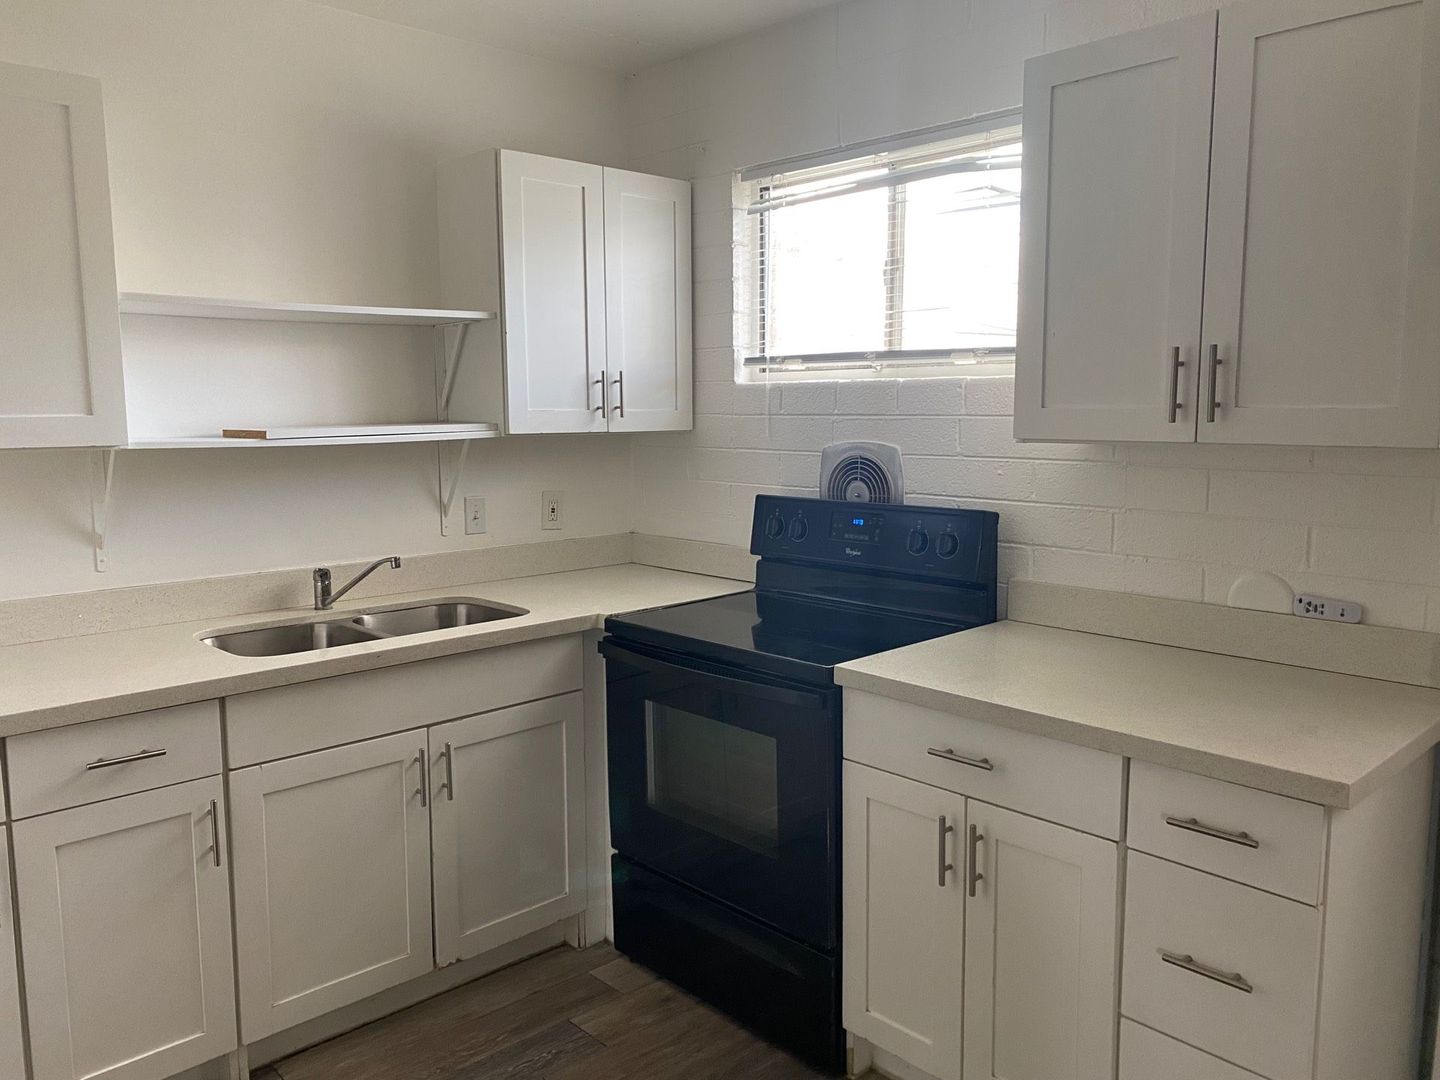 Beautiful Renovations One and Two Bedrooms Located in the Heart of Tempe!